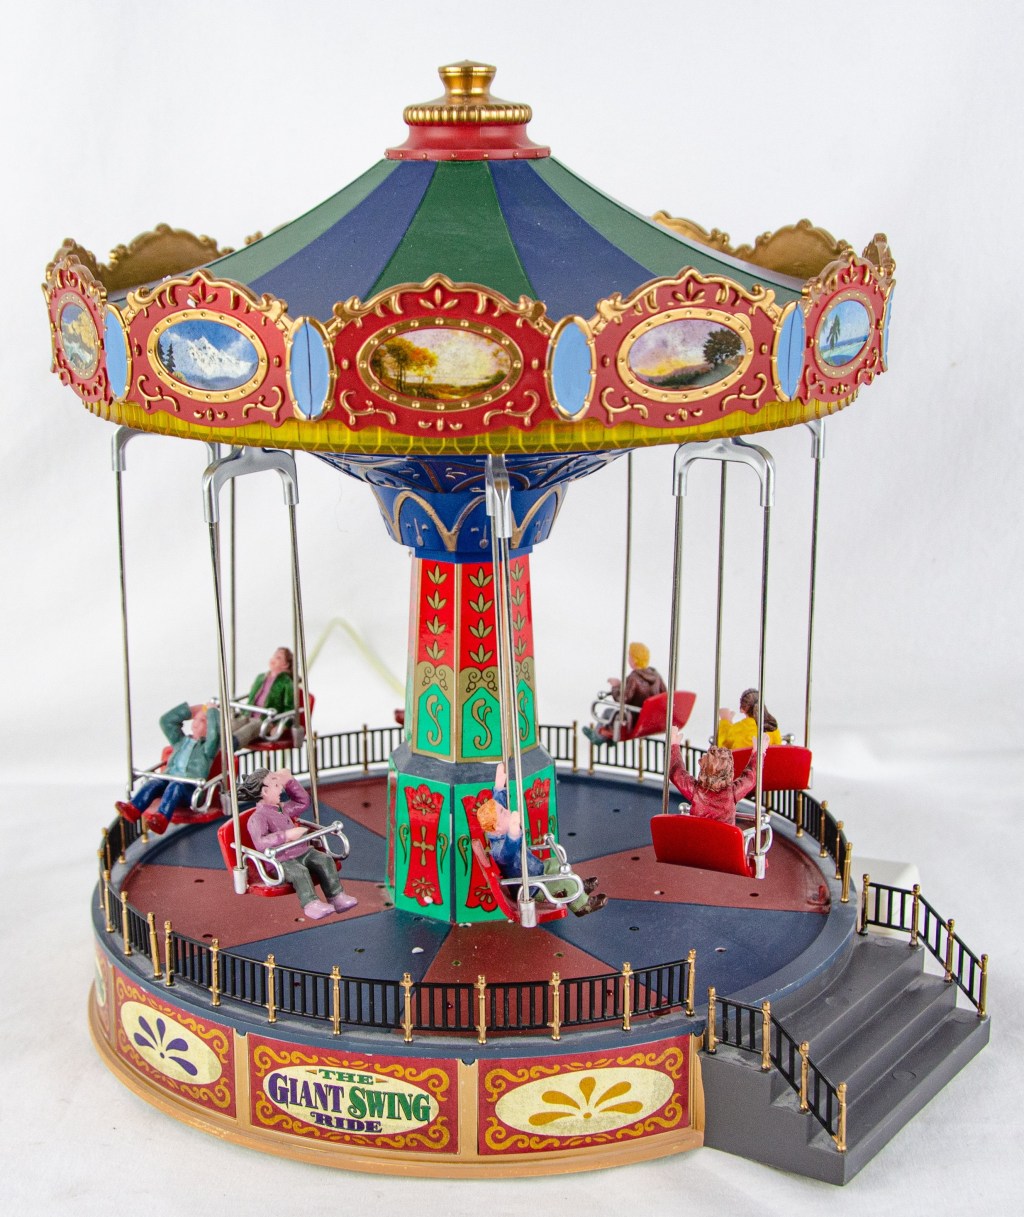 lemax carnival rides for sale - Lemax Giant Swing Ride  Carnival Amusement Park - Etsy